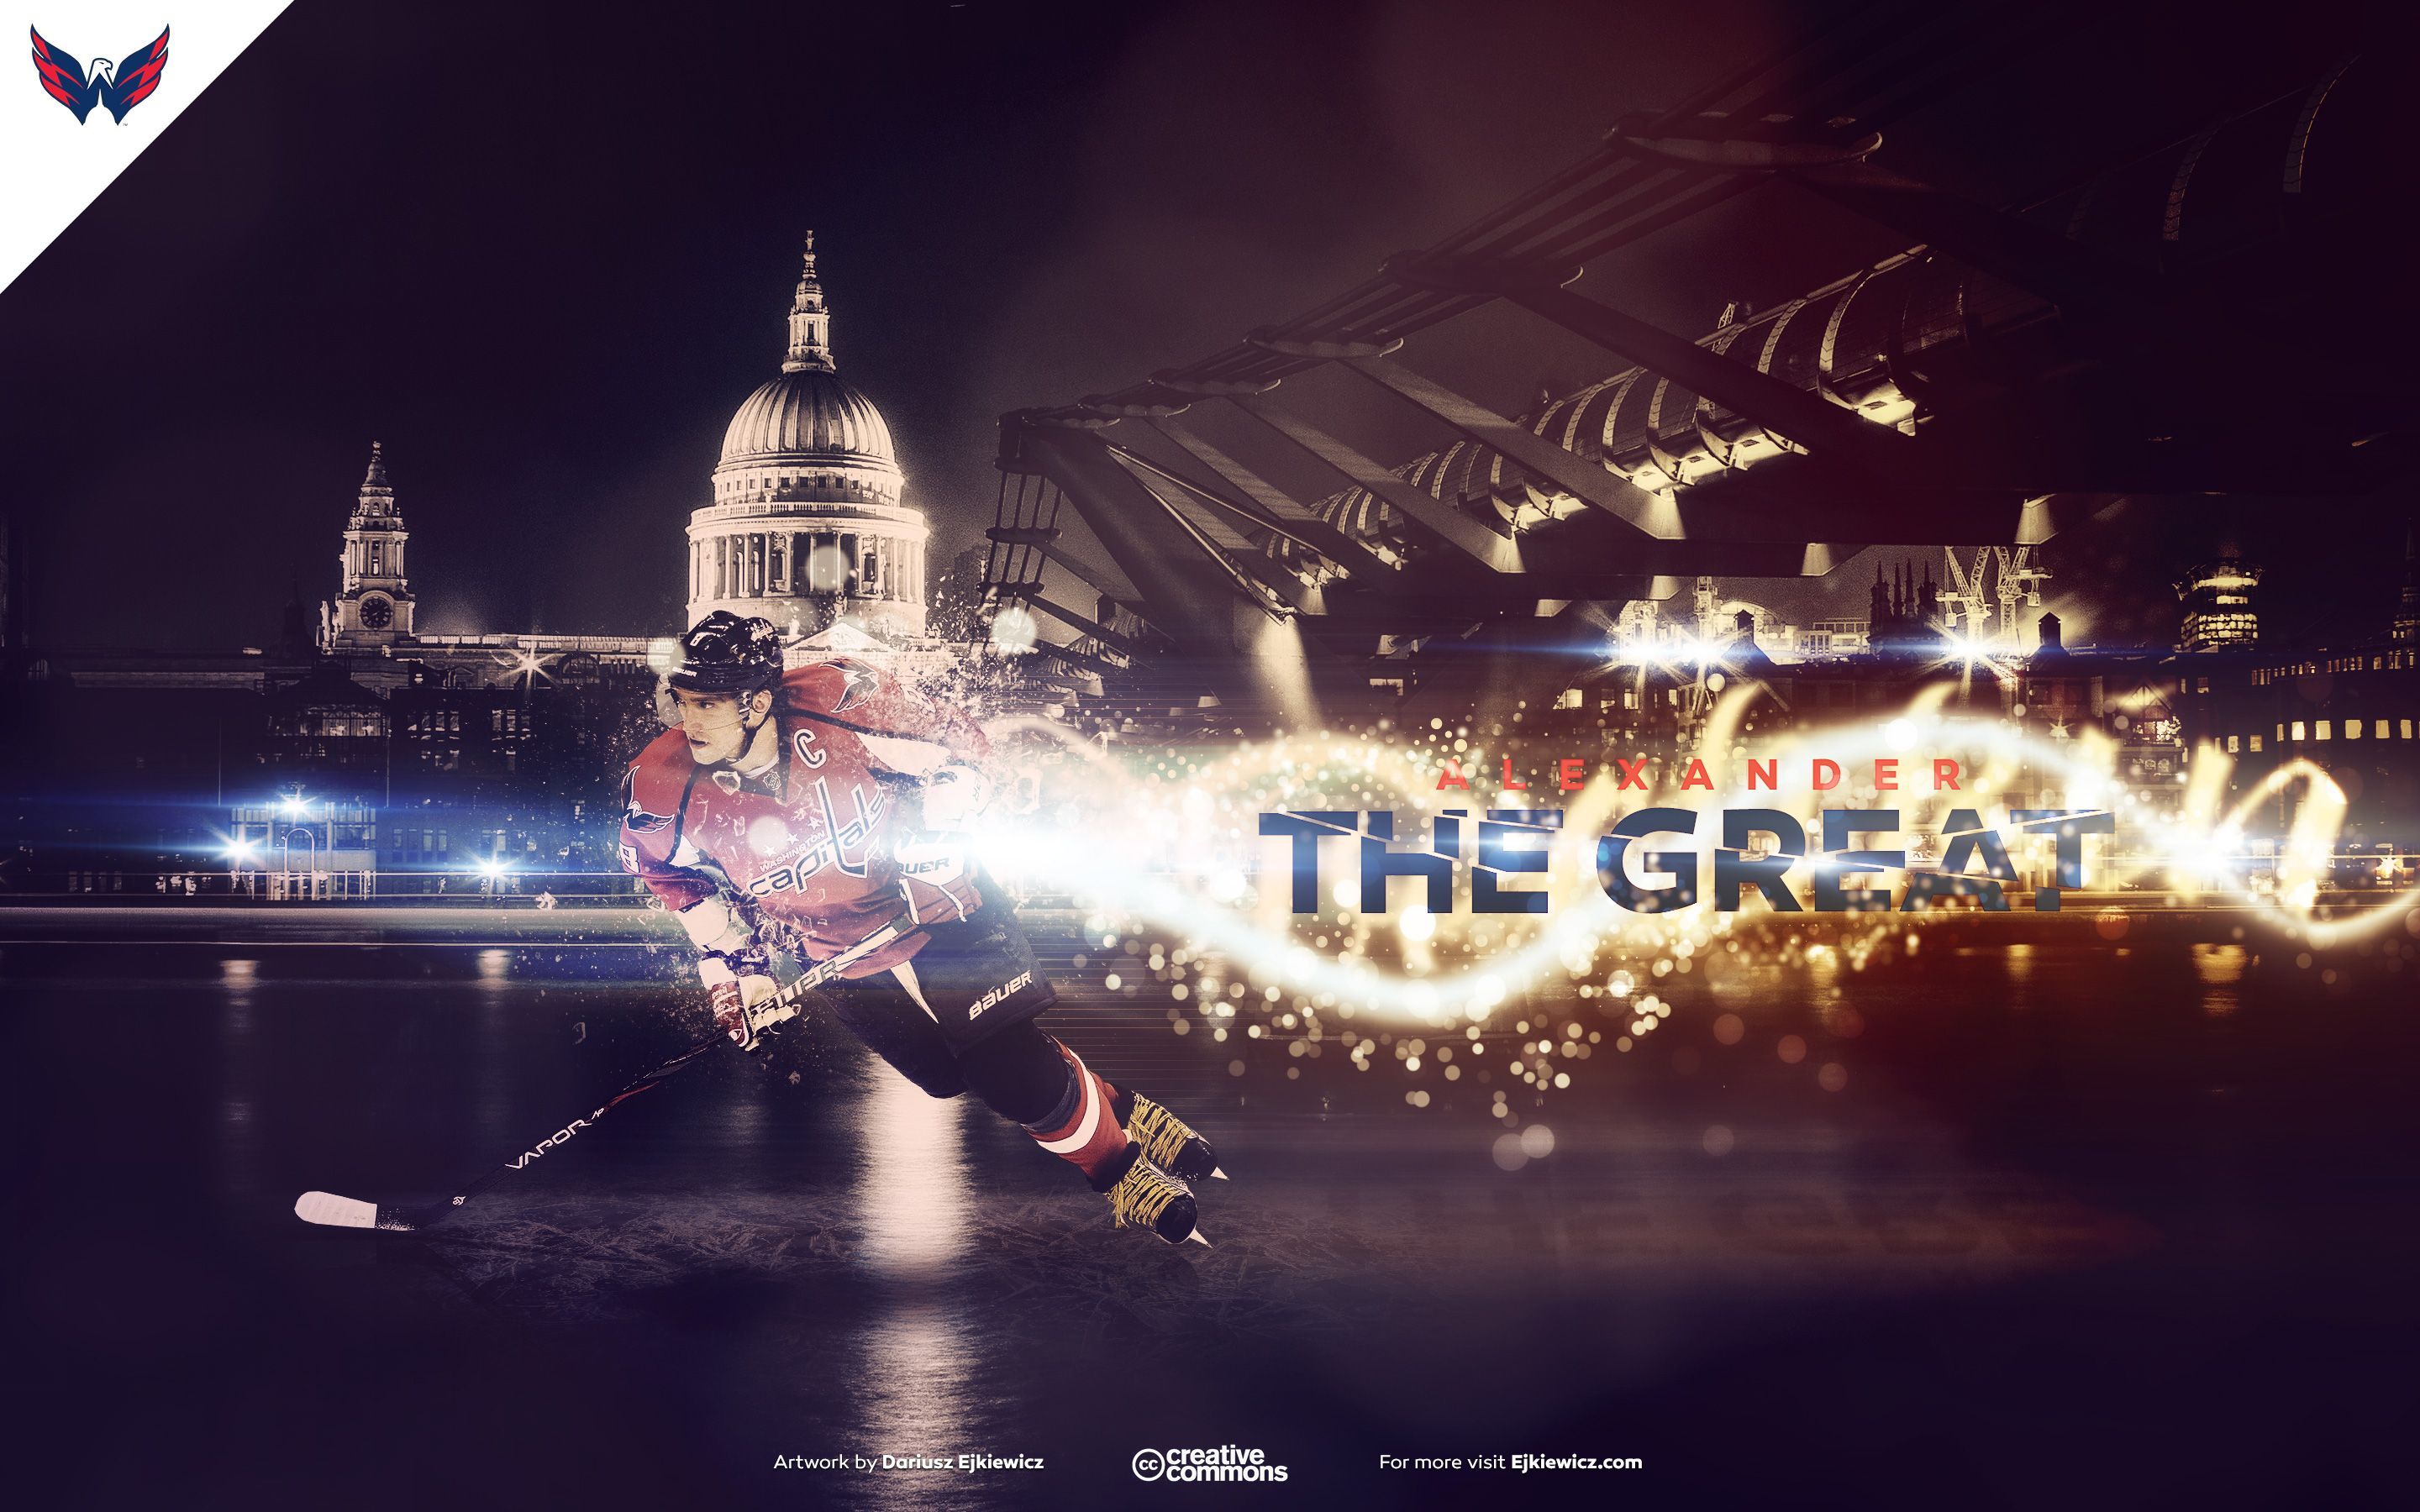 Alexander Ovechkin The Great Ejkiewicz.com Creative services